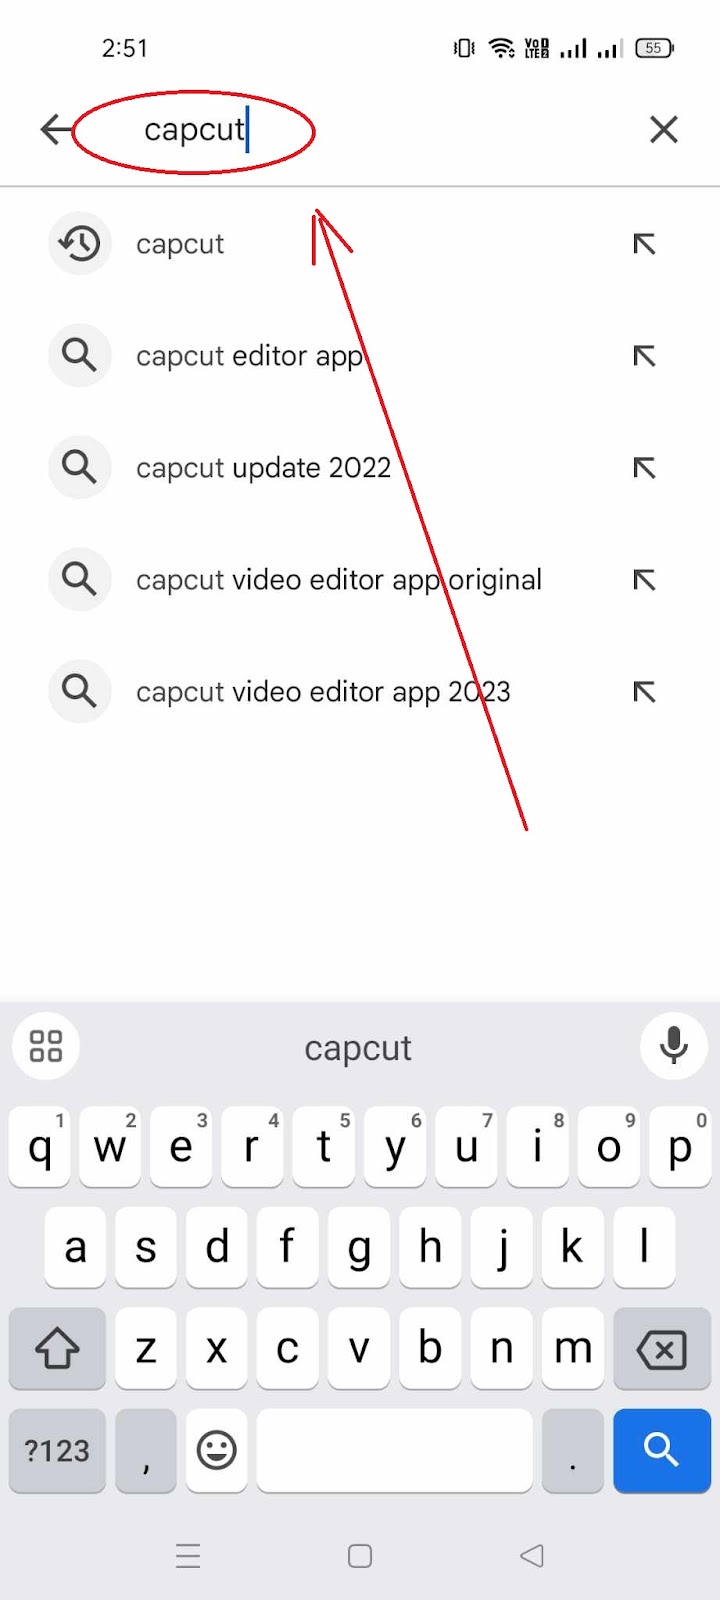 CapCut Export Issues How to Fix - Search for Capcut